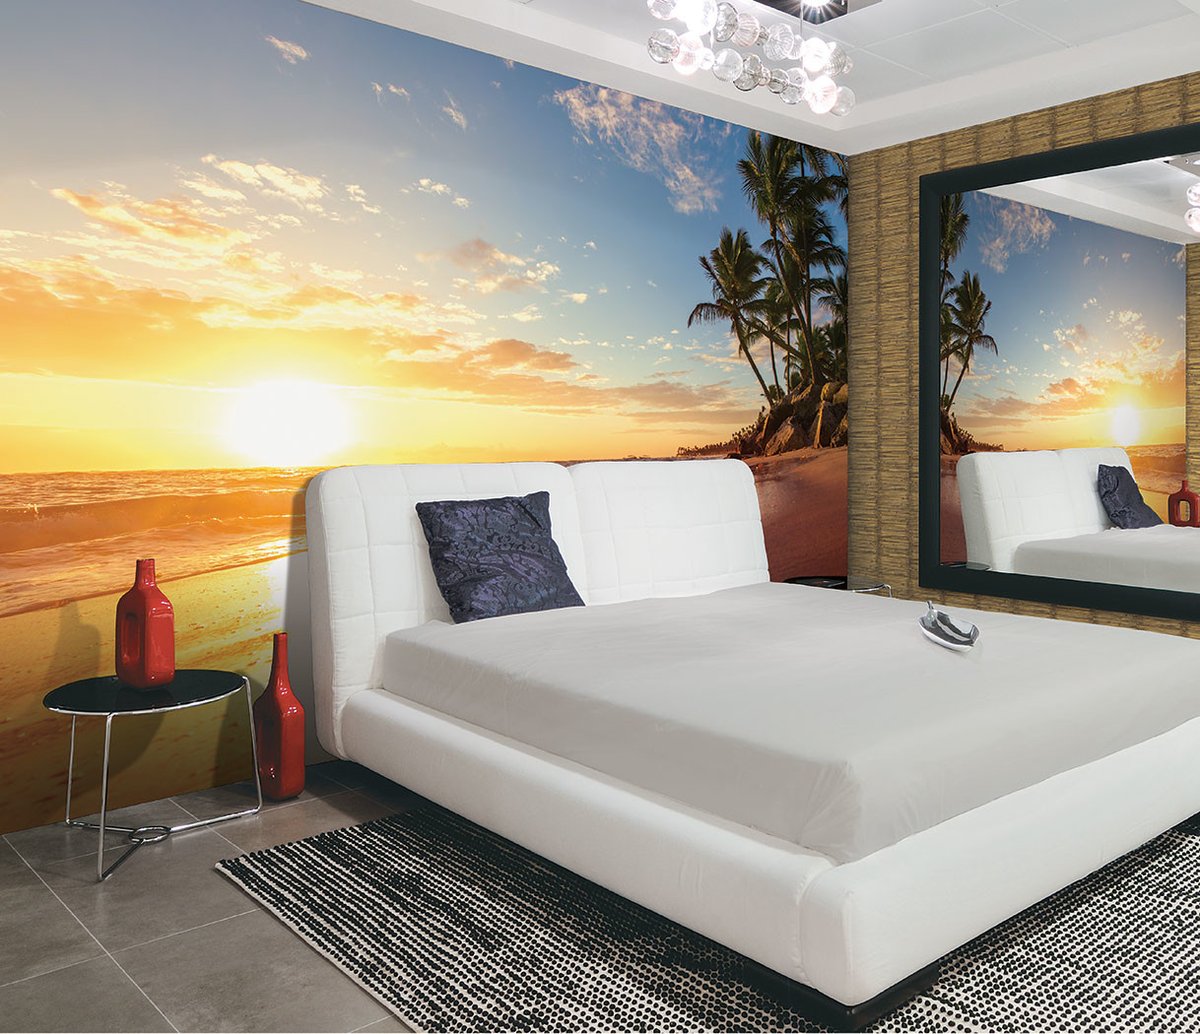 Why are sunsets so beautiful? Probably some scientific however why not just enjoy it. 
Tropical Sunset Global Fusion Mural G45273 #wallpaperpeeps #thewallpaperpeople #decor #featurewall #wallcovering #Wallpaper #GalerieWallpaper #GlobalFusion bit.ly/2KKtDCm